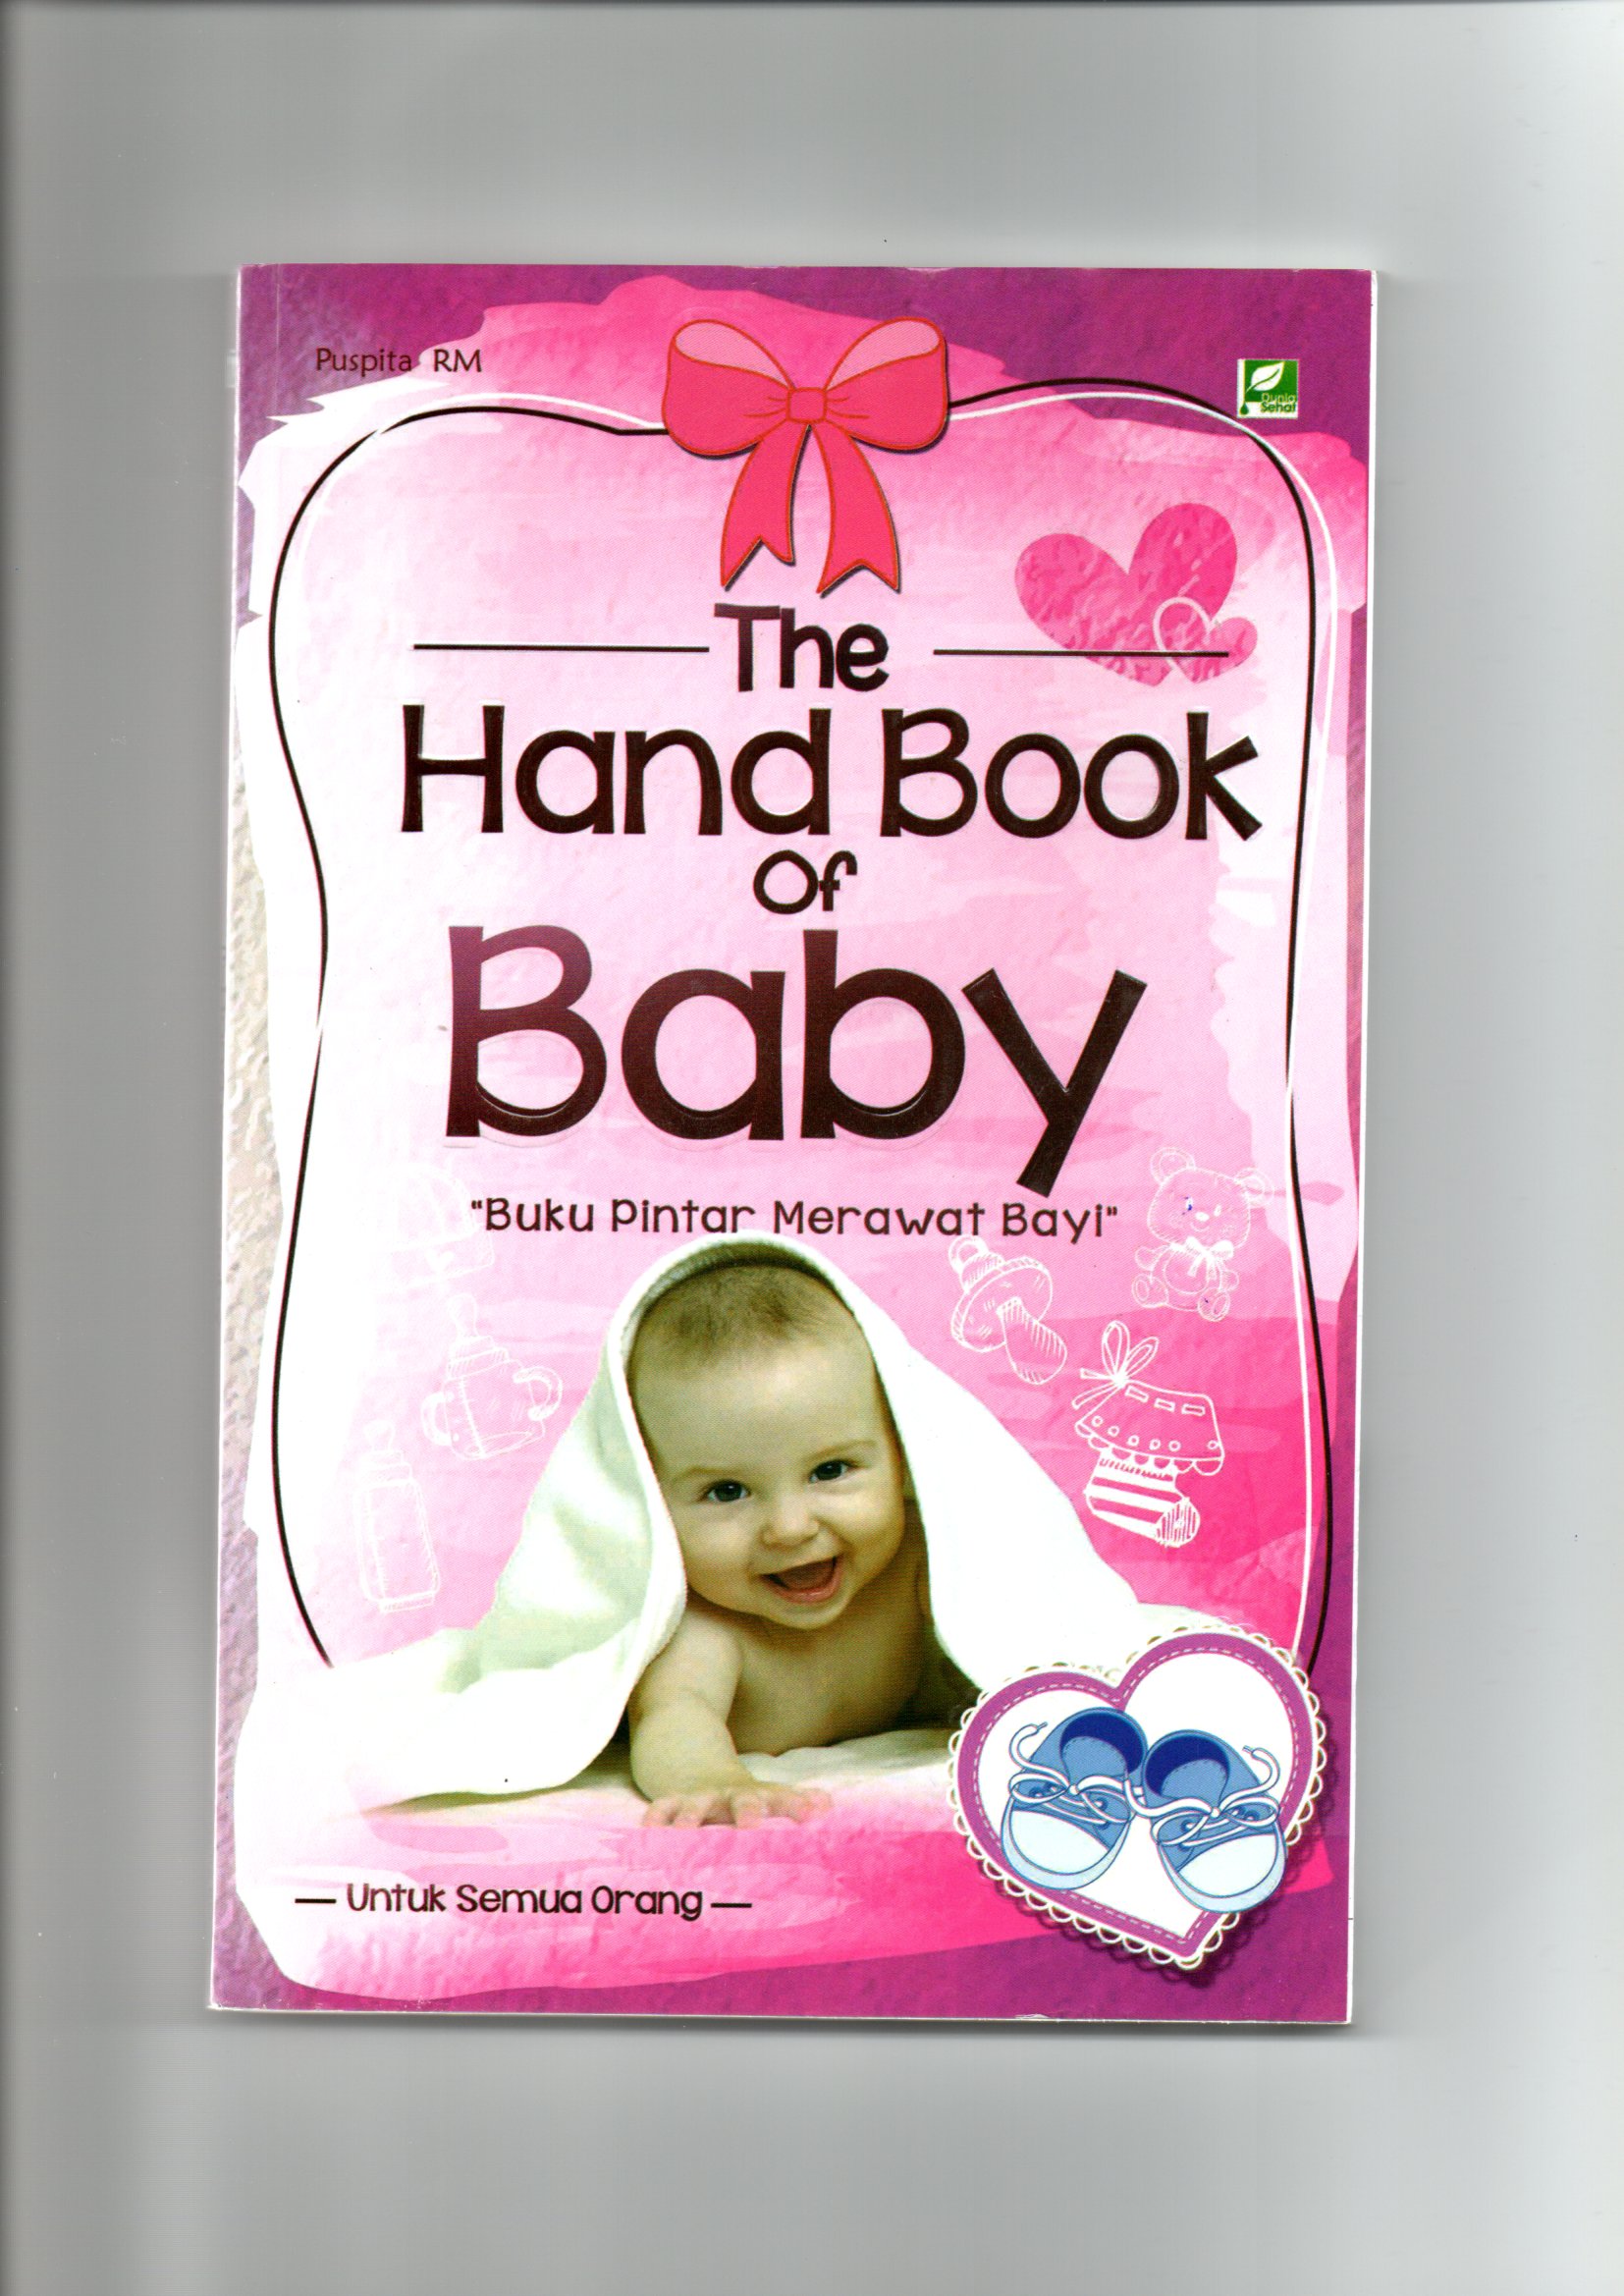 The hand book of baby